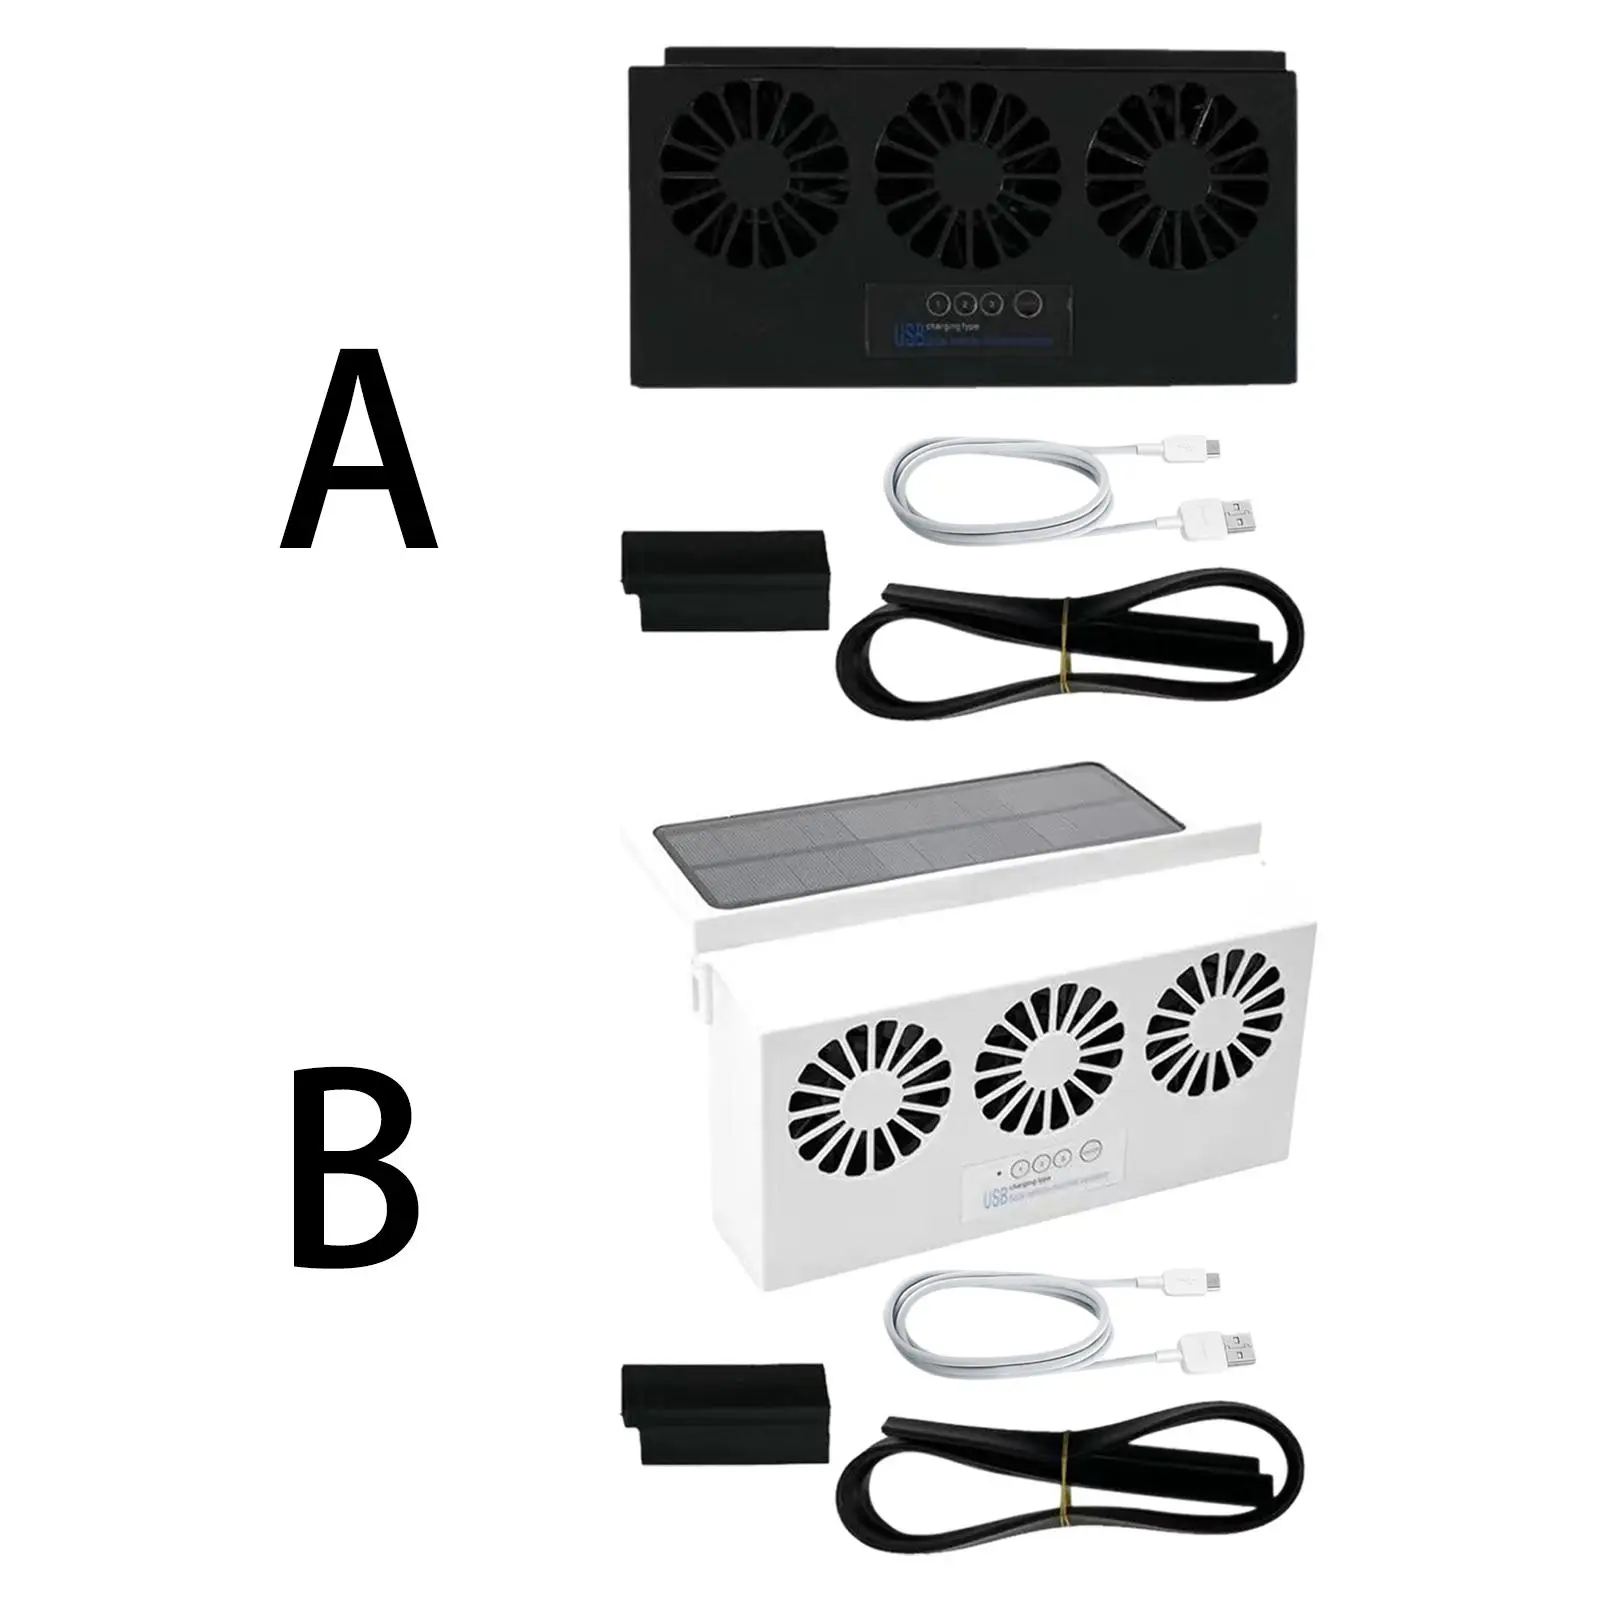  Car Ventilator Exhaust Fan USB Charging 5 Duct Portable 3 Cooler Fan Cooling  Purifiers for Vehicle